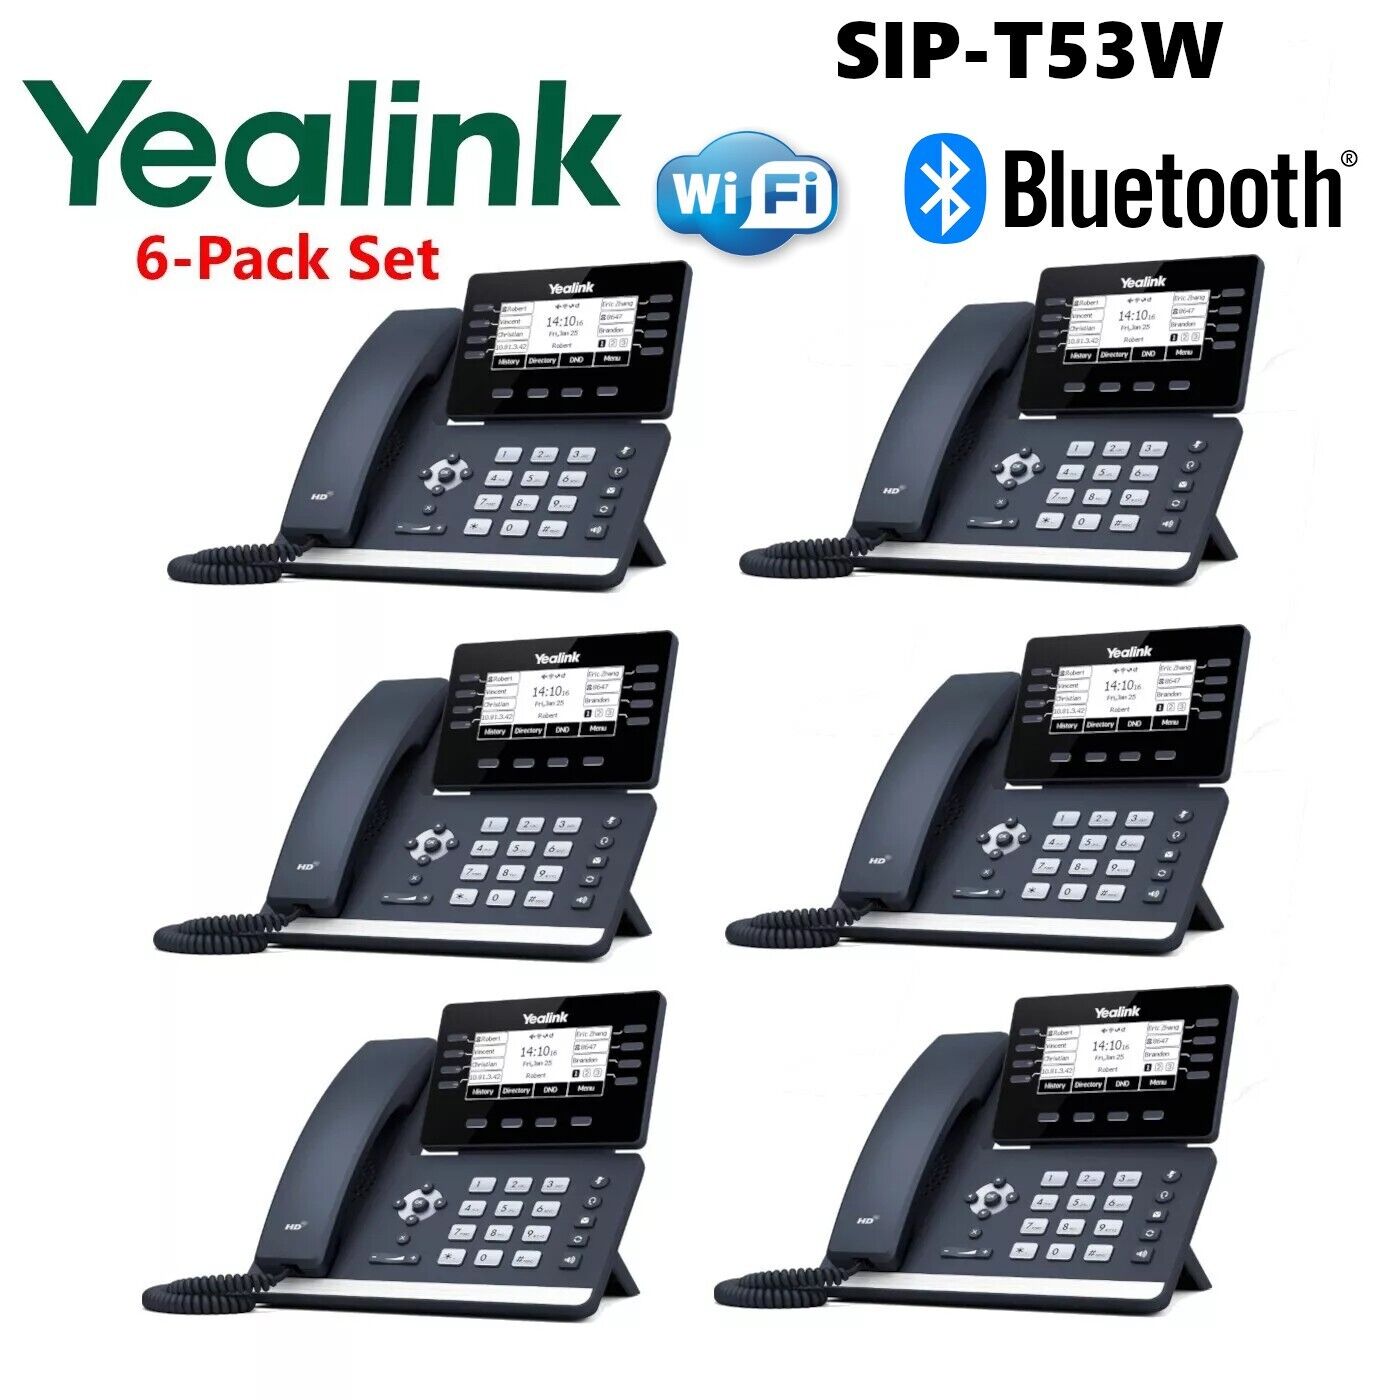 6 Pack Lot Yealink SIP-T53W Prime Business Phone T53W Entry Level Bluetooth WiFi